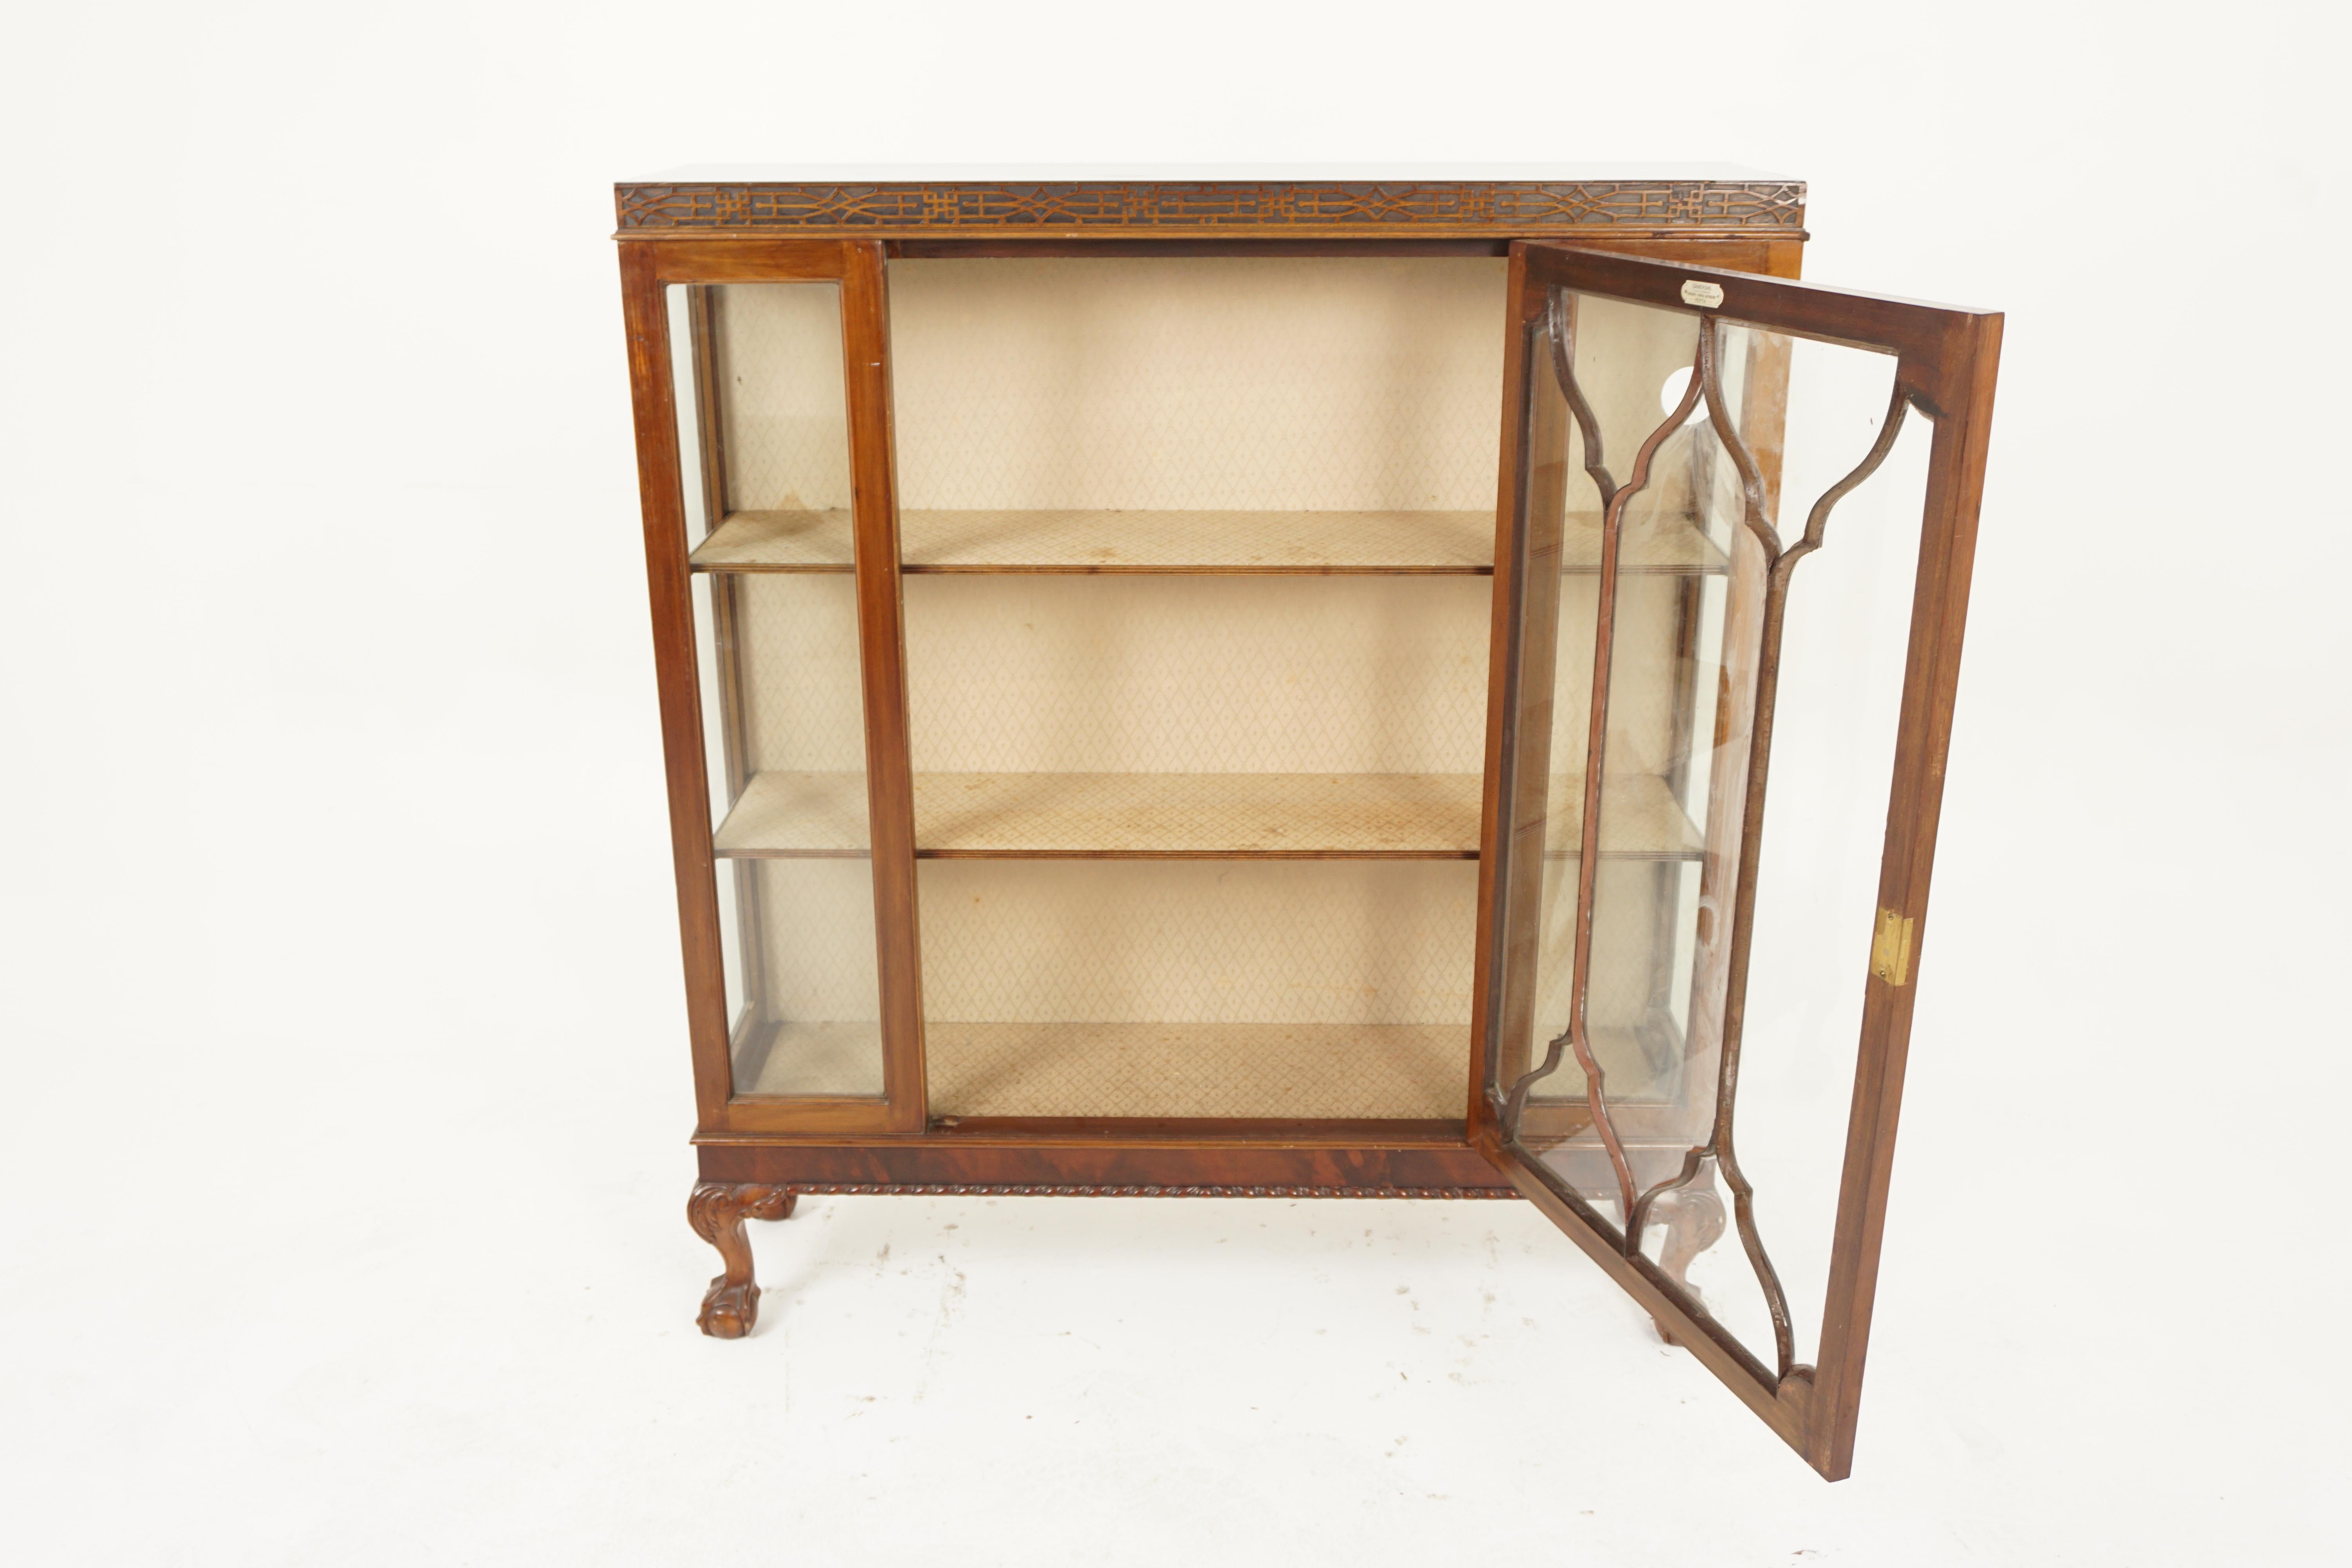 Vintage Walnut China Cabinet, Display Cabinet, Camerons Perth, Scotland 1930, H1008

Solid Walnut
Original finish
Rectangular moulded top
Carved fretwork underneath
Single original glass door with shaped moulding on the front
Pair of side windows on